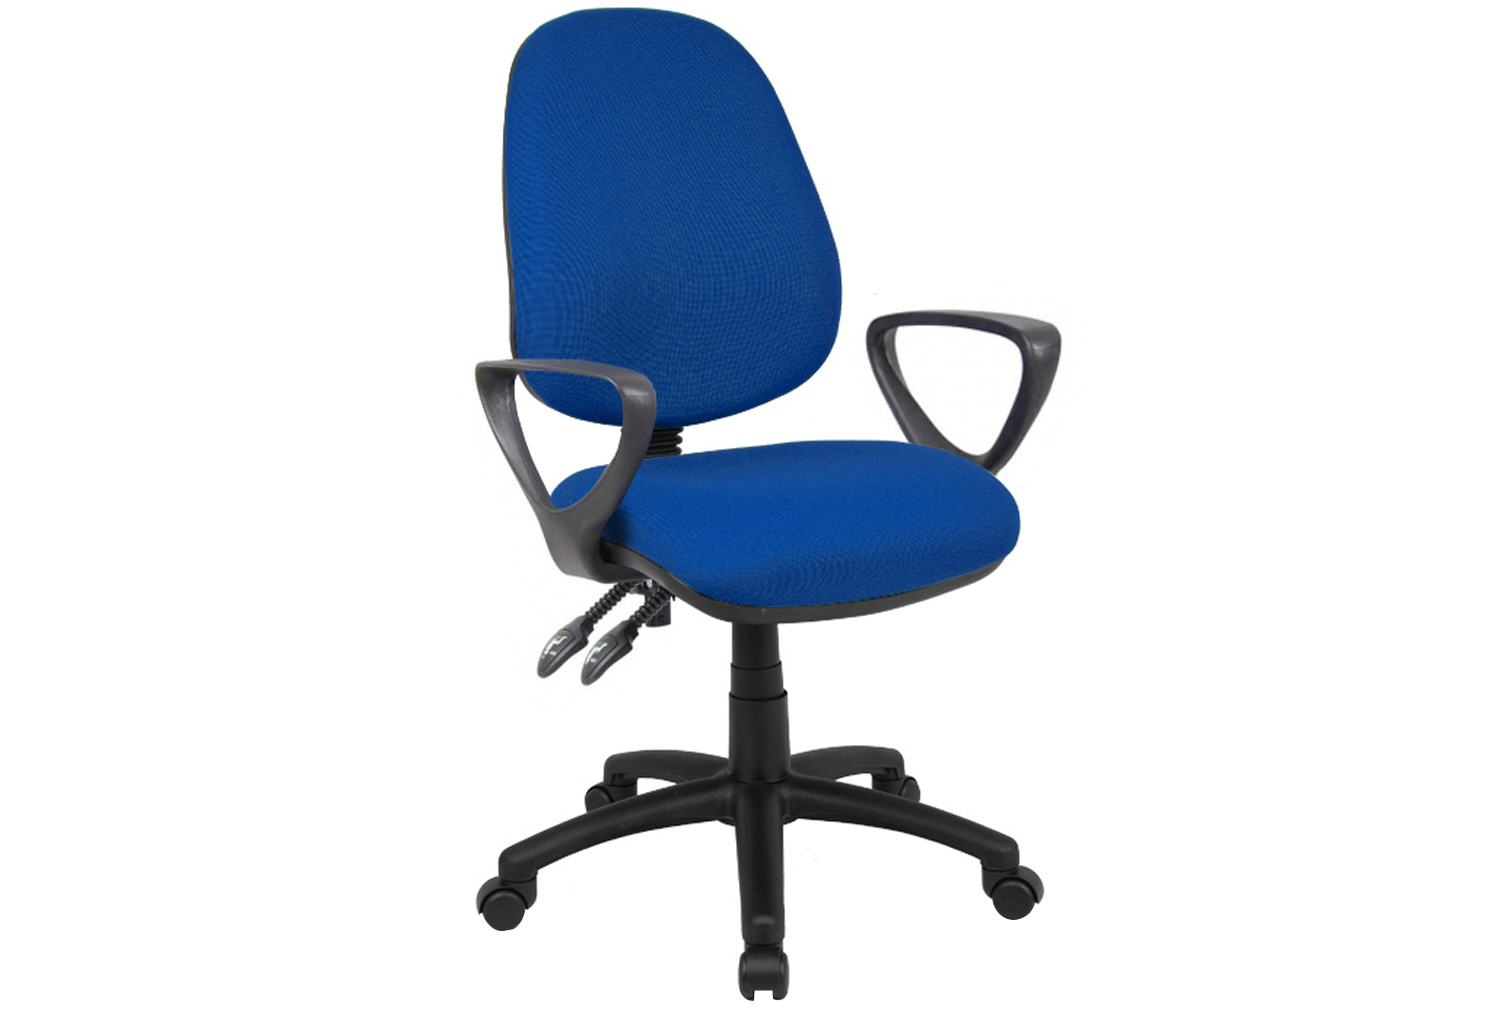 Full Lumbar 2 Lever Operator Office Chair With Fixed Arms, Blue, Fully Installed